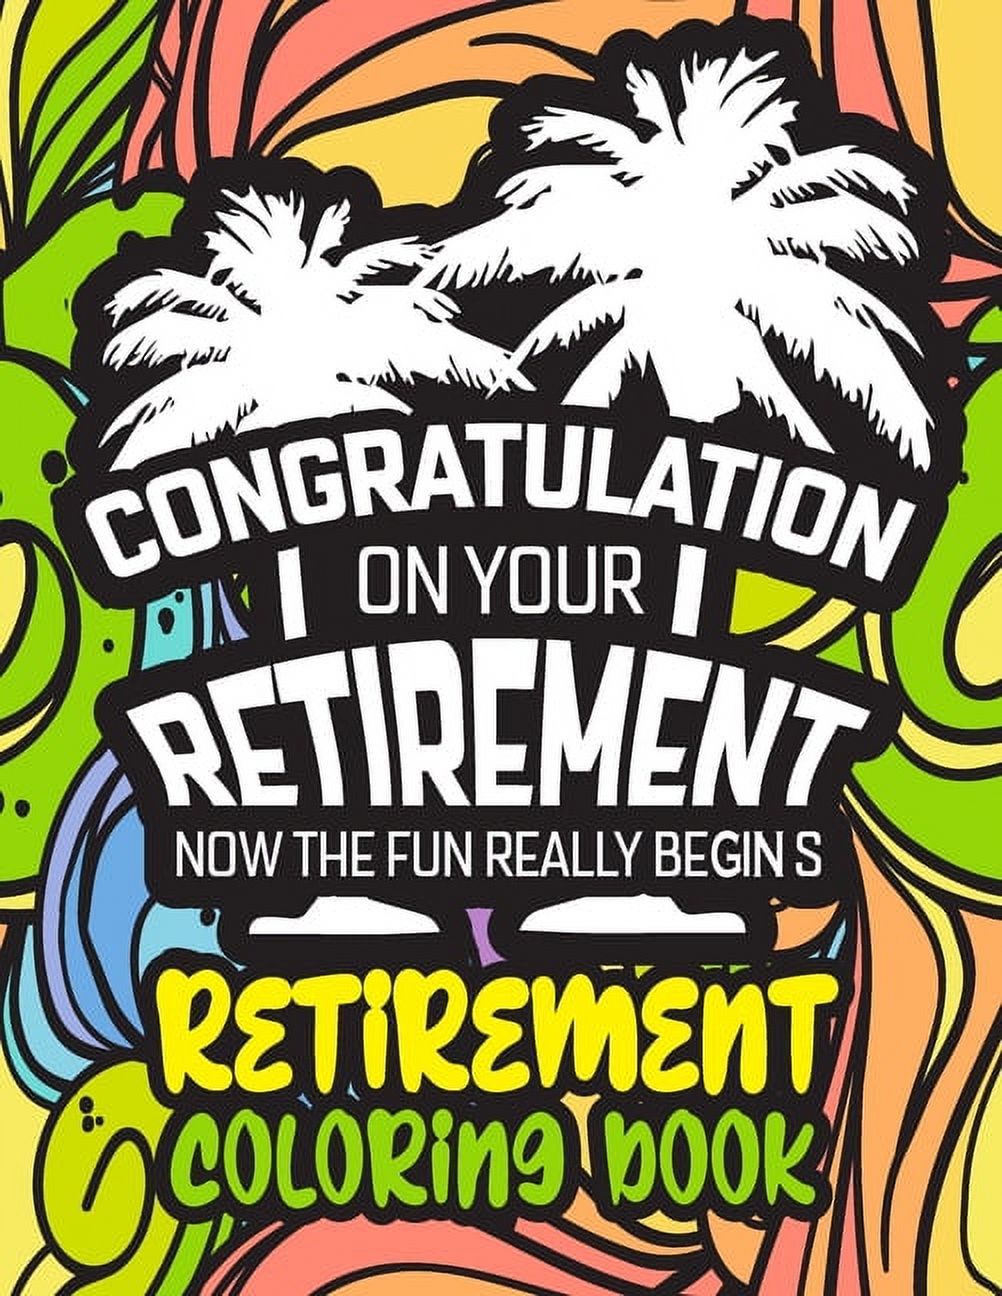 Congratulation on Your Retirement Now the Fun Really Begins - Retirement Coloring Book: Funny Gift Idea for Dad, Mom, Men, Women and All Retired Seniors, (Paperback) - image 1 of 1